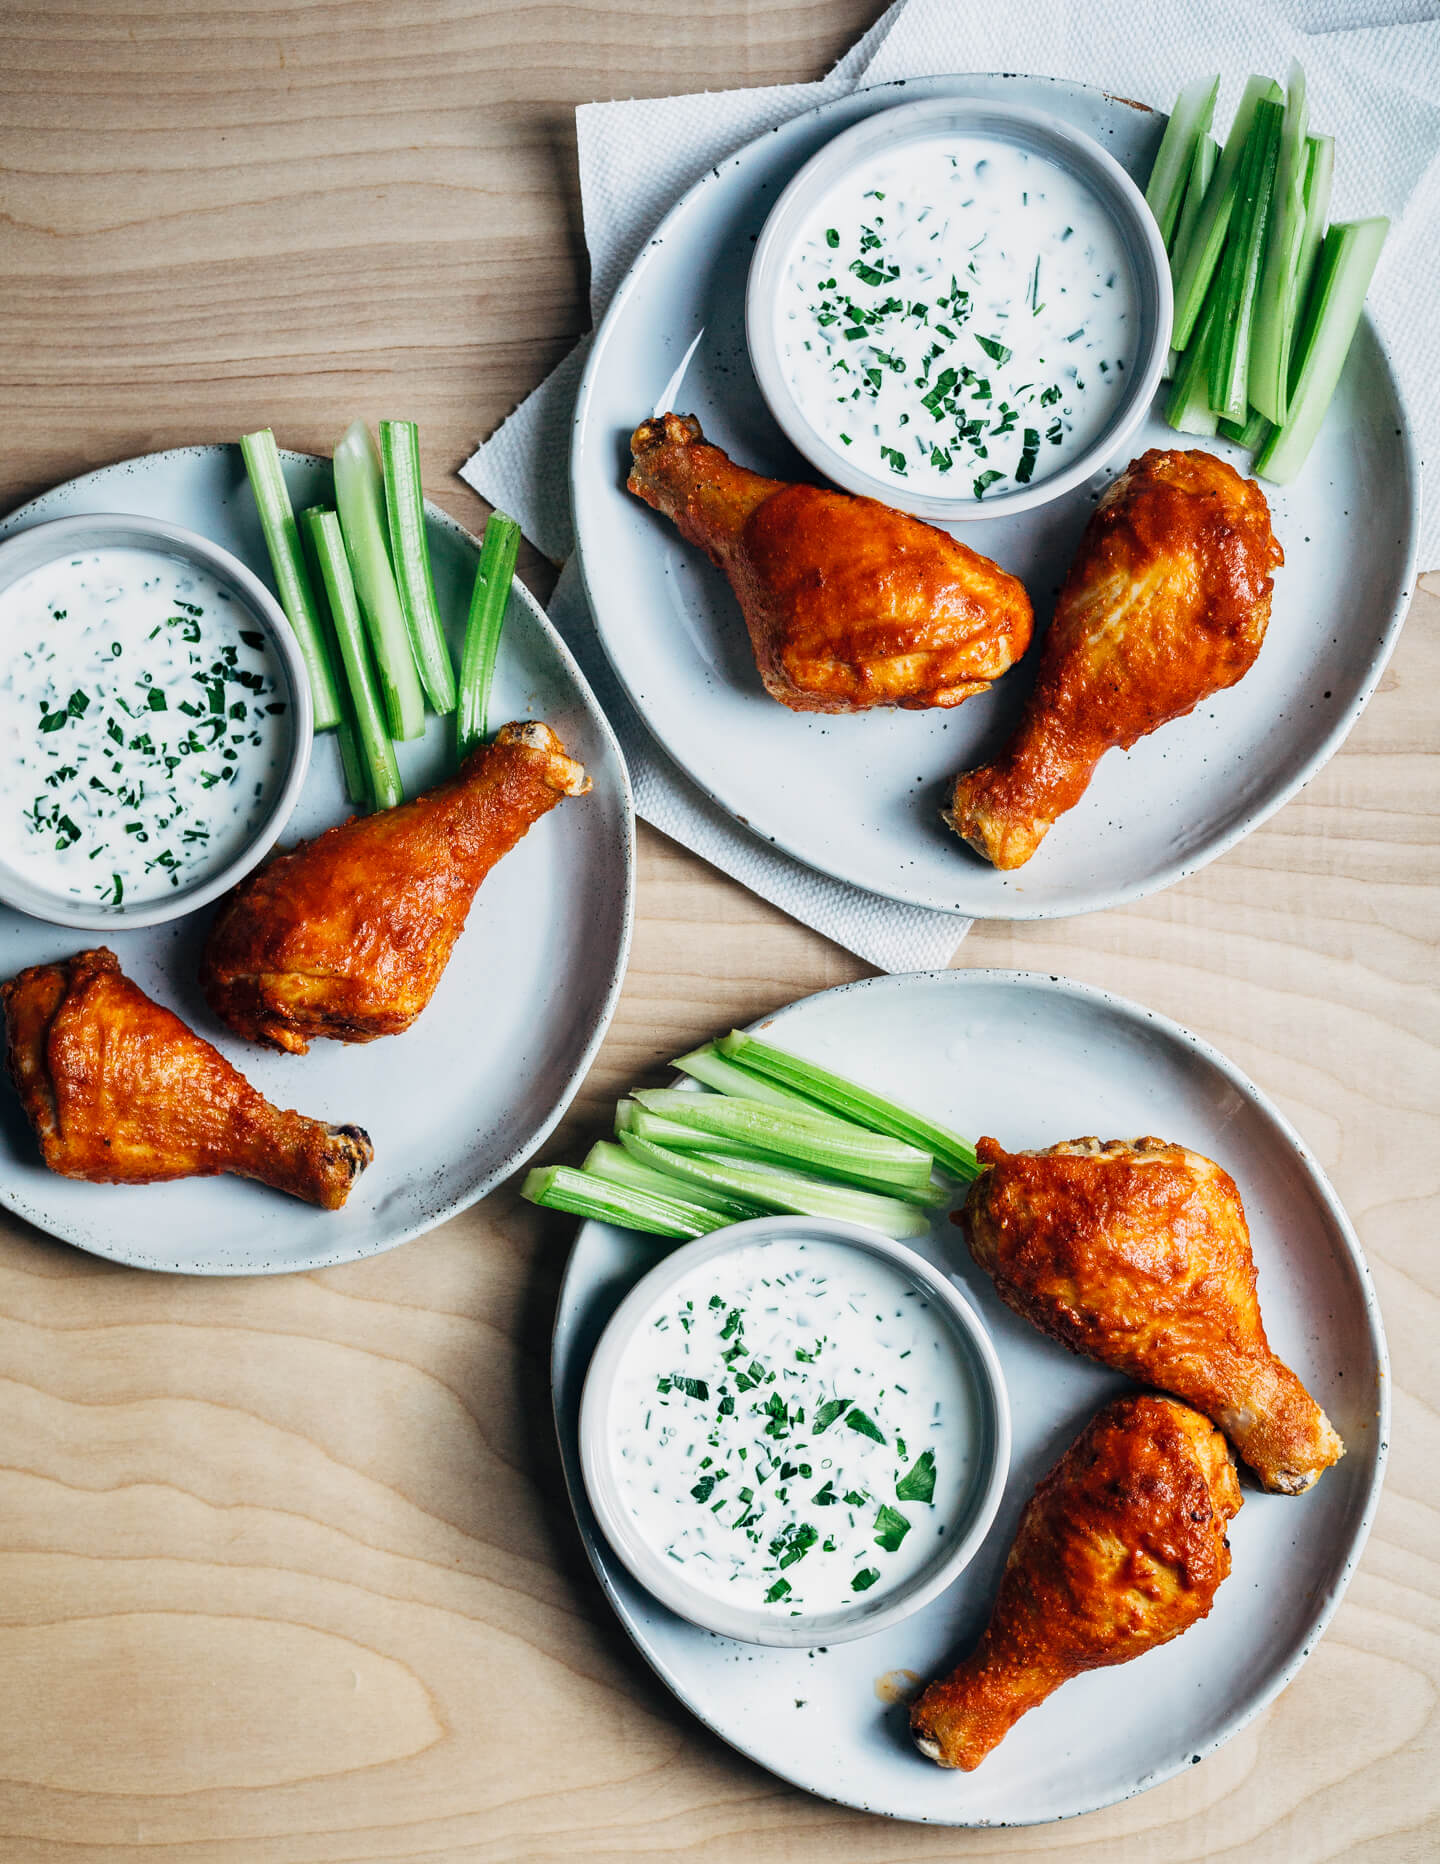 Hearty oven-roasted Buffalo chicken drumsticks with buttermilk ranch dressing and celery sticks are the perfect meal for spring and summer celebrations and gatherings.